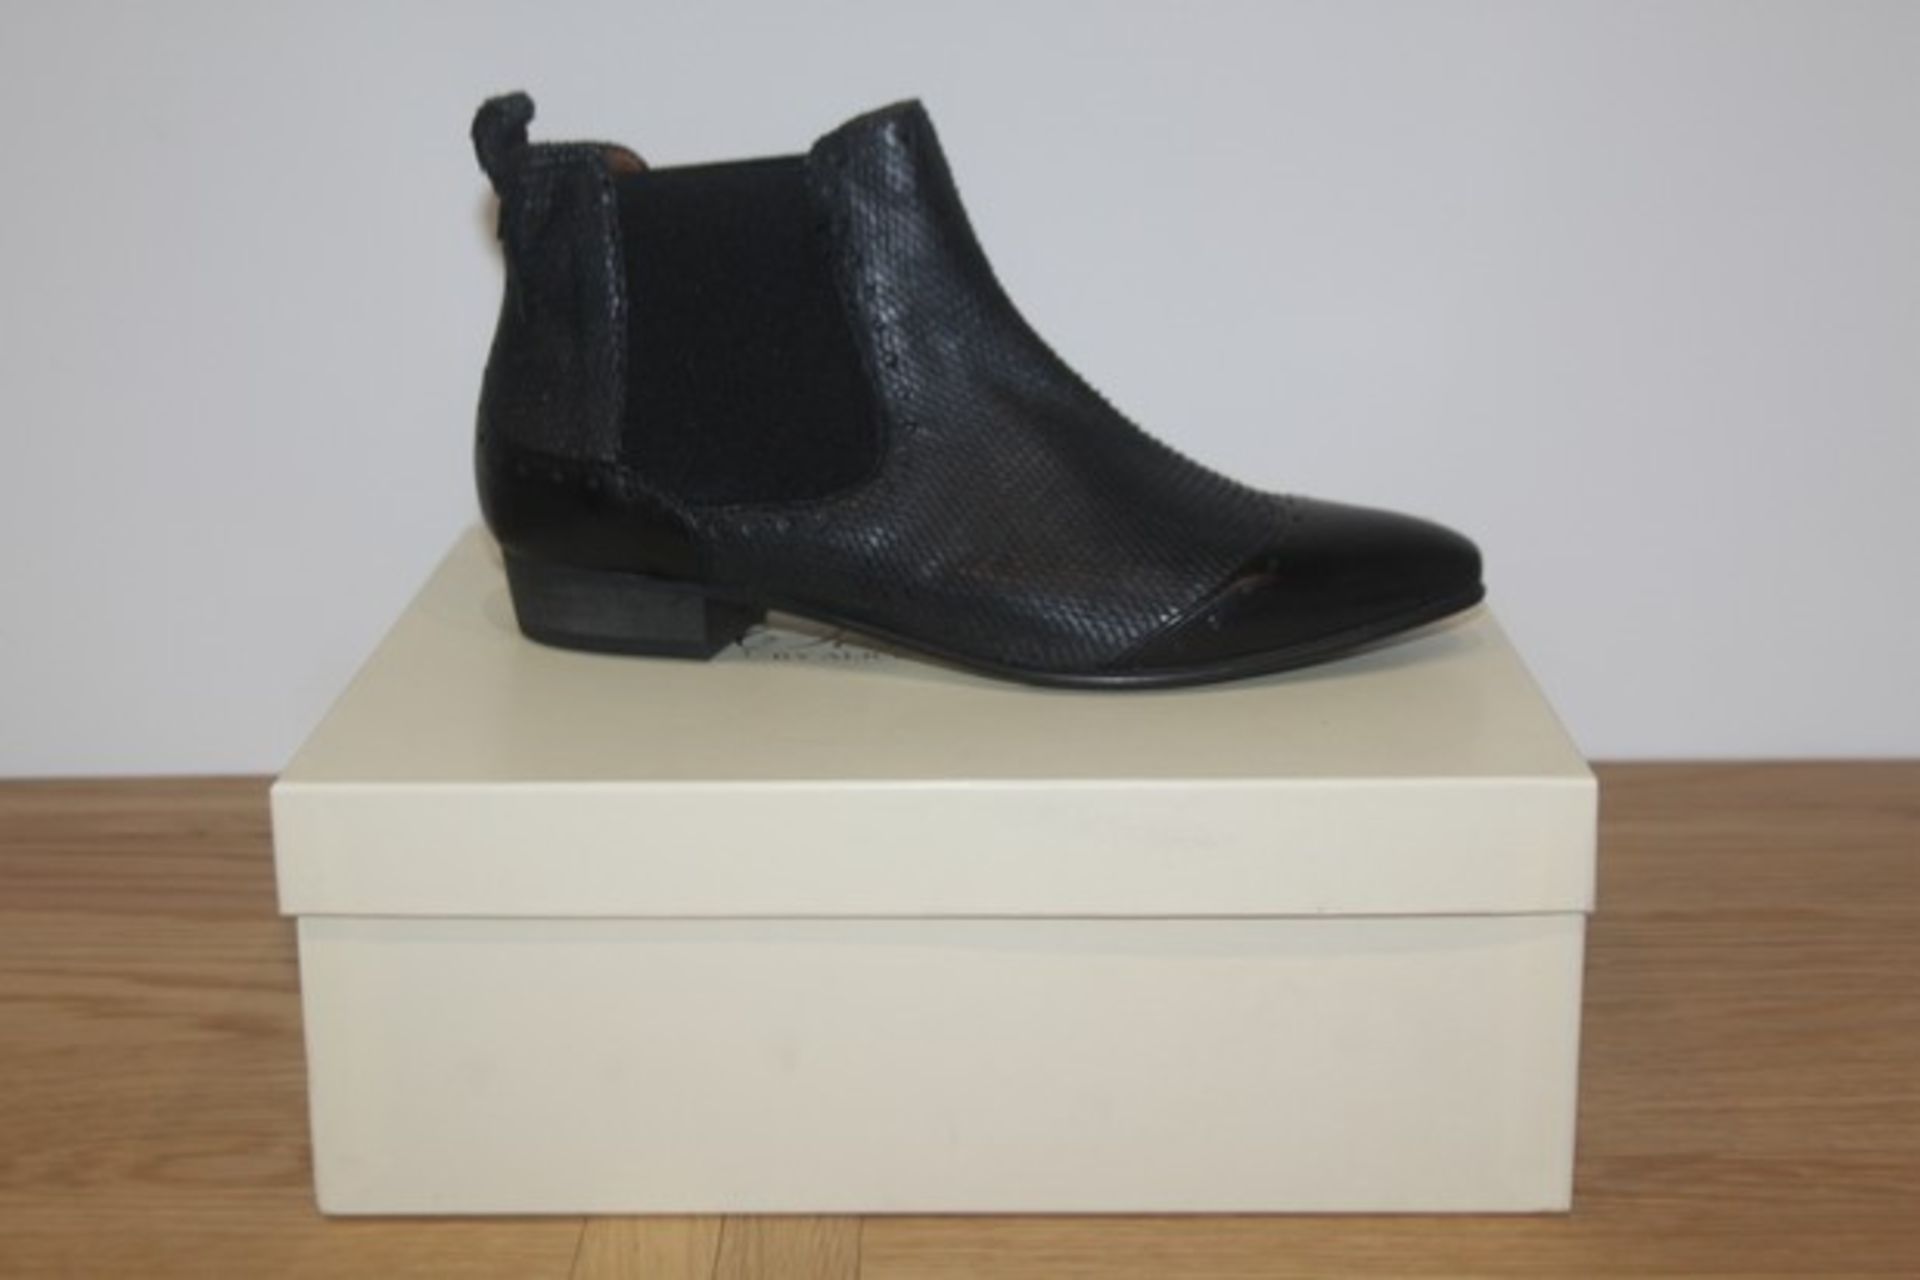 BOXED BRAND NEW SOMERSET BY ALICE TEMPERLEY SHOES SIZE 5 RRP £150 (DSSALVAGE)